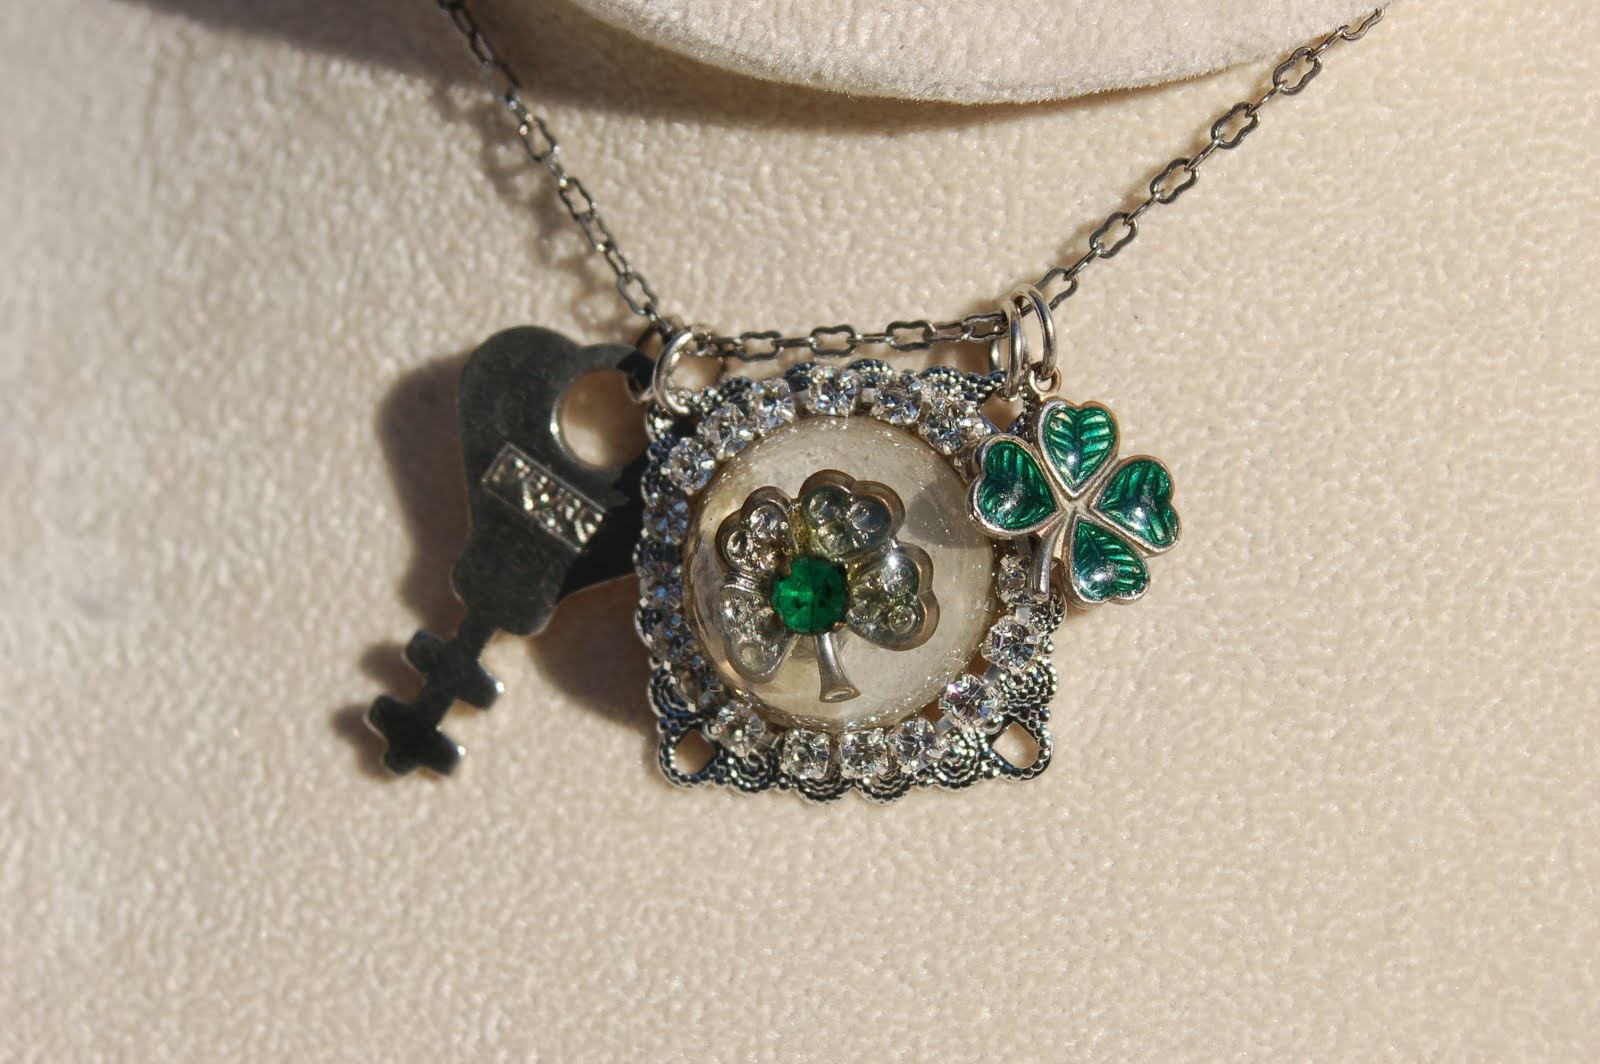 Necklace with clover earring cast in resin